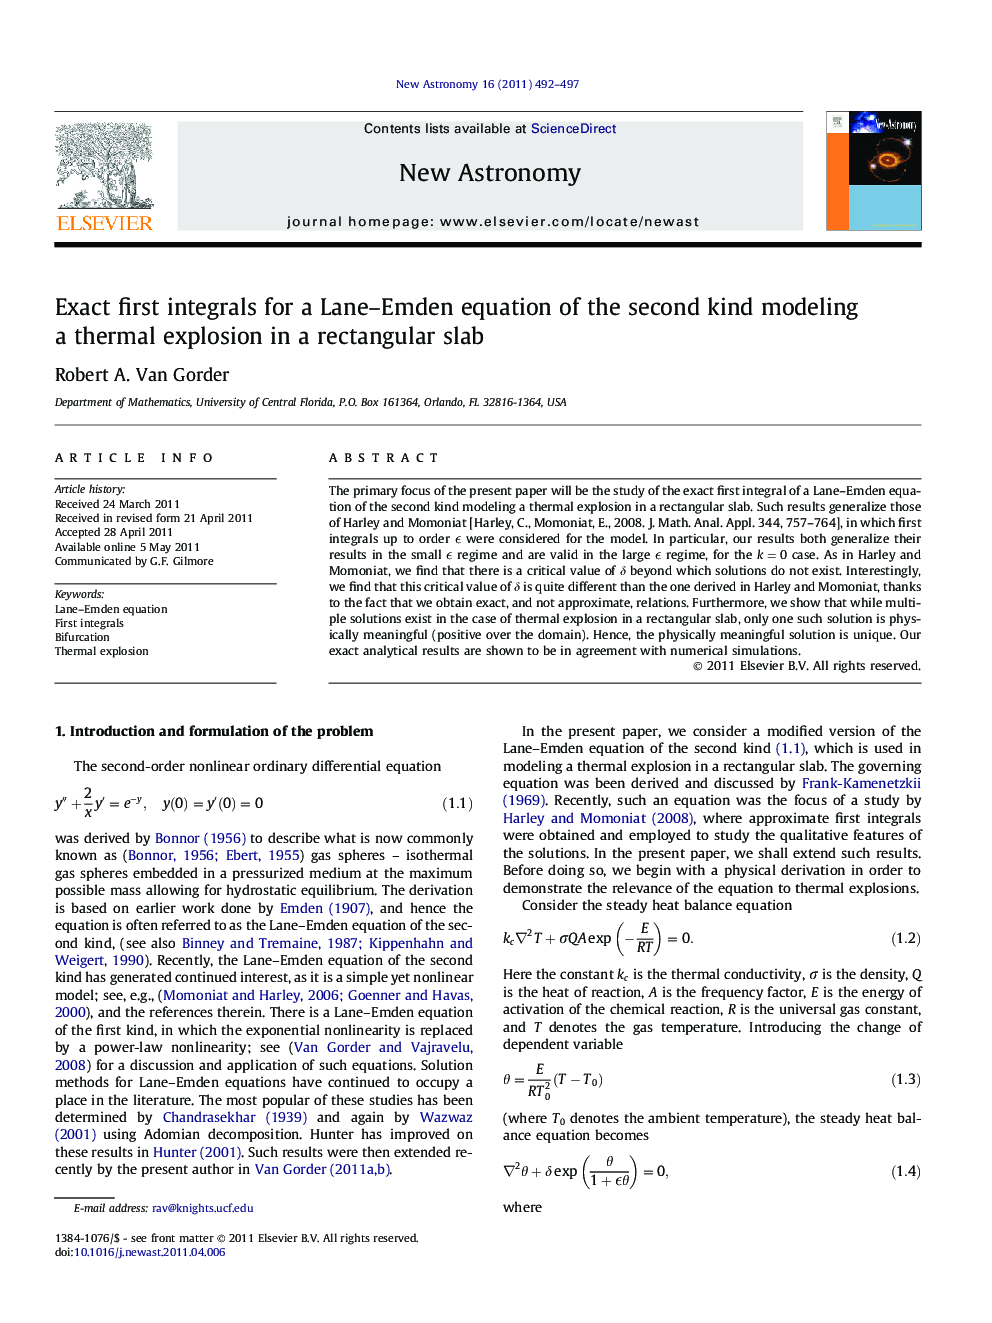 Exact first integrals for a Lane-Emden equation of the second kind modeling a thermal explosion in a rectangular slab